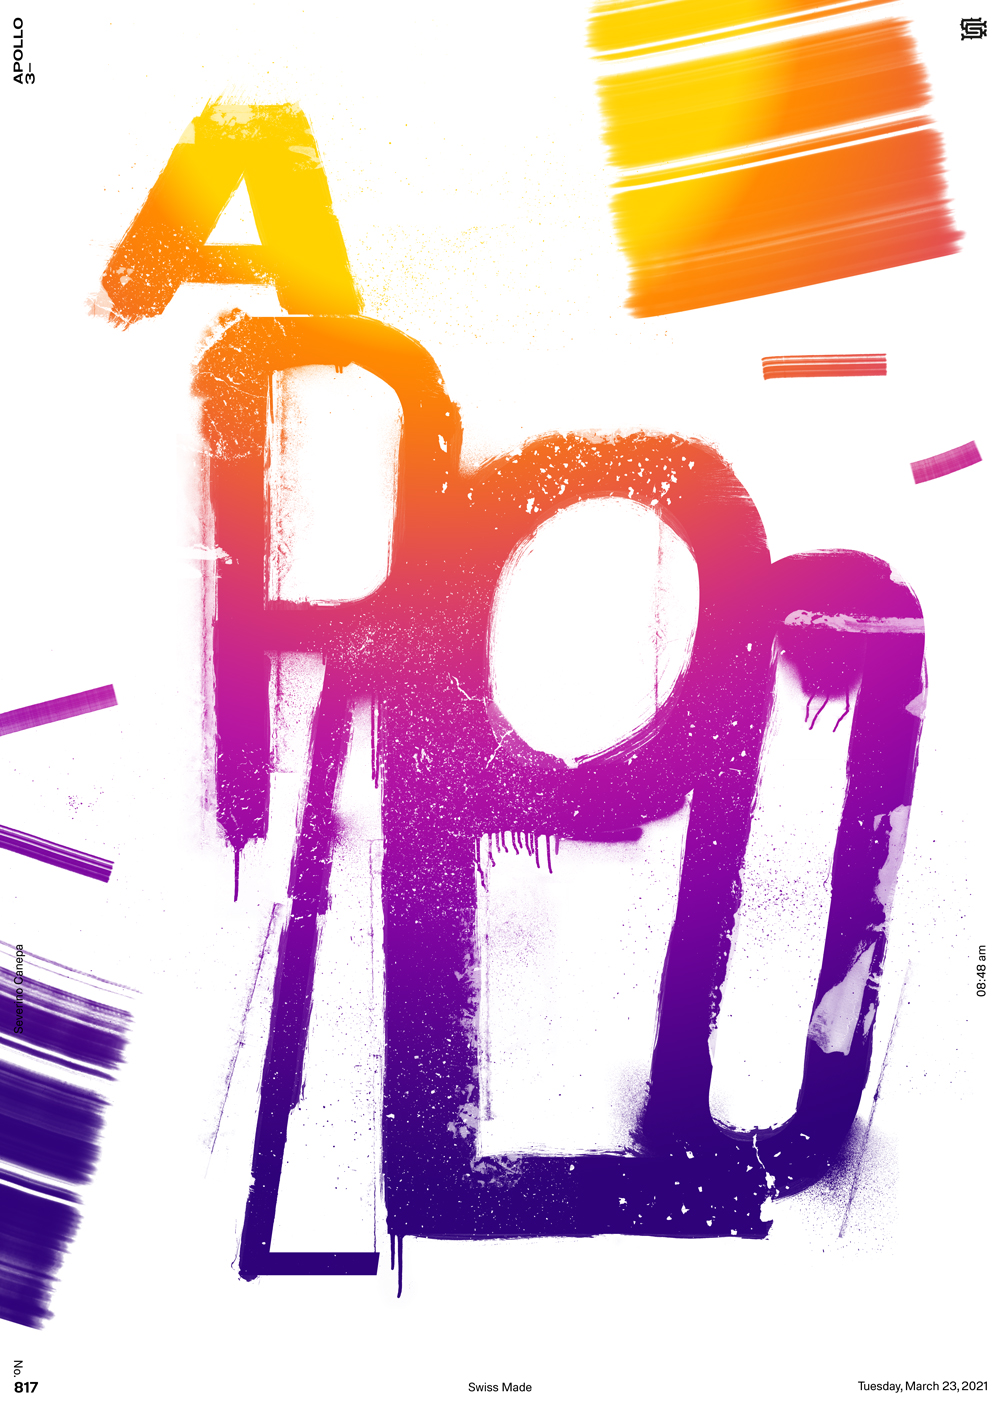 Graphic and typographic creation made with letters and dirty brushes with a colorful gradient